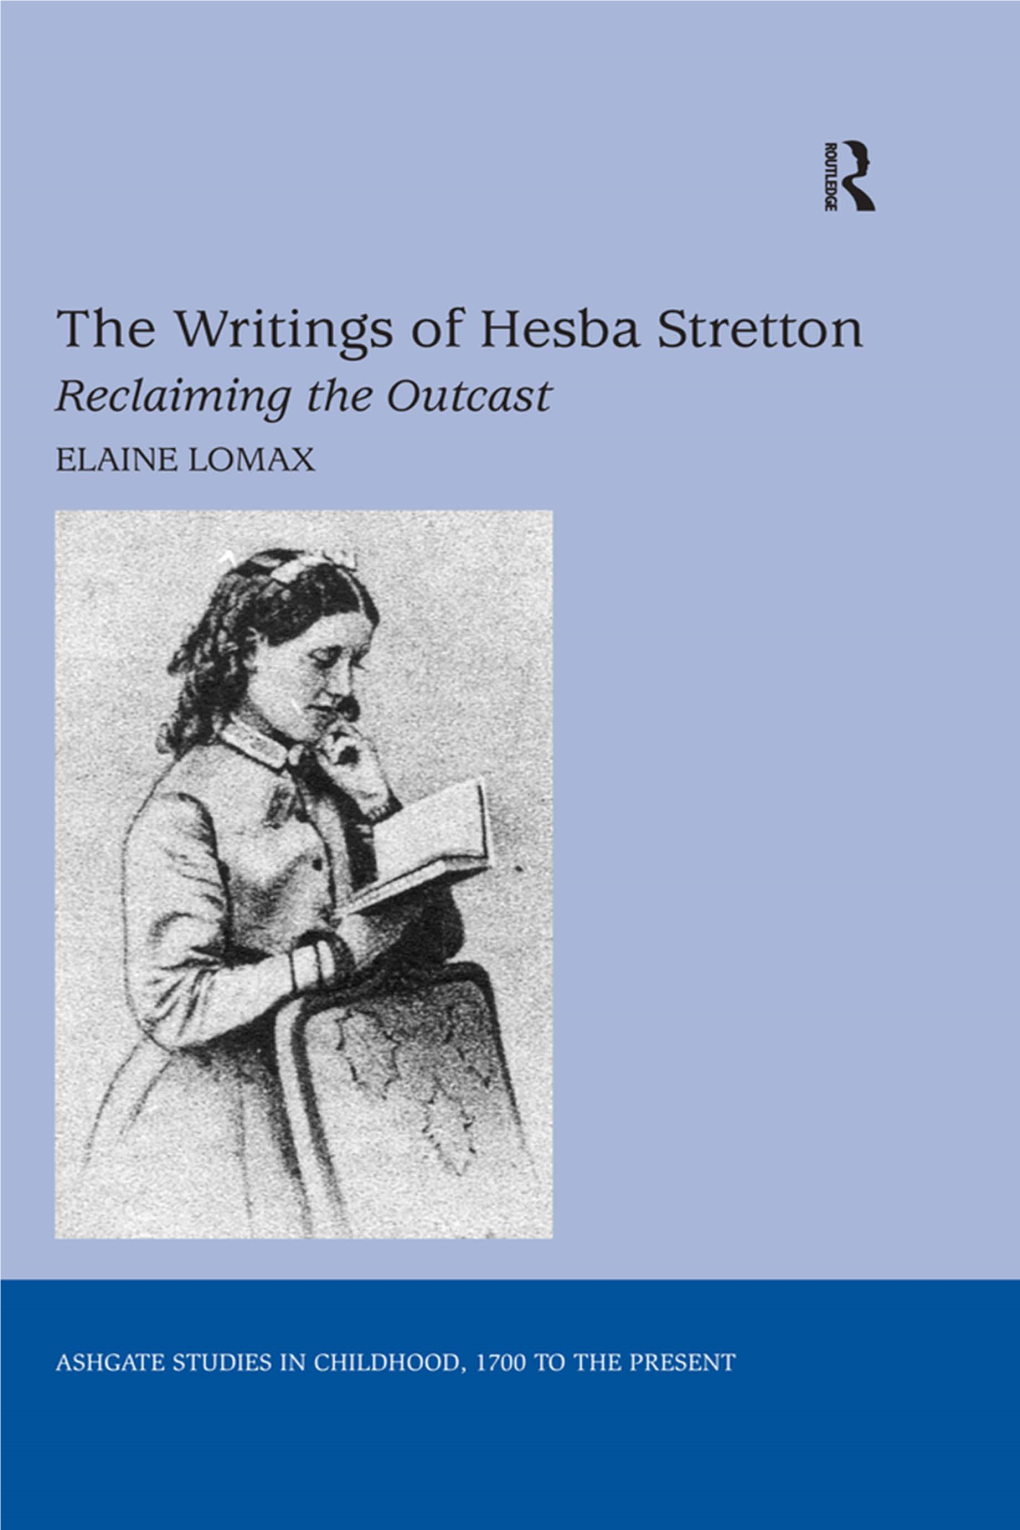 THE Writings of HESBA Stretton Ashgate Studies in Childhood, 1700 to the Present